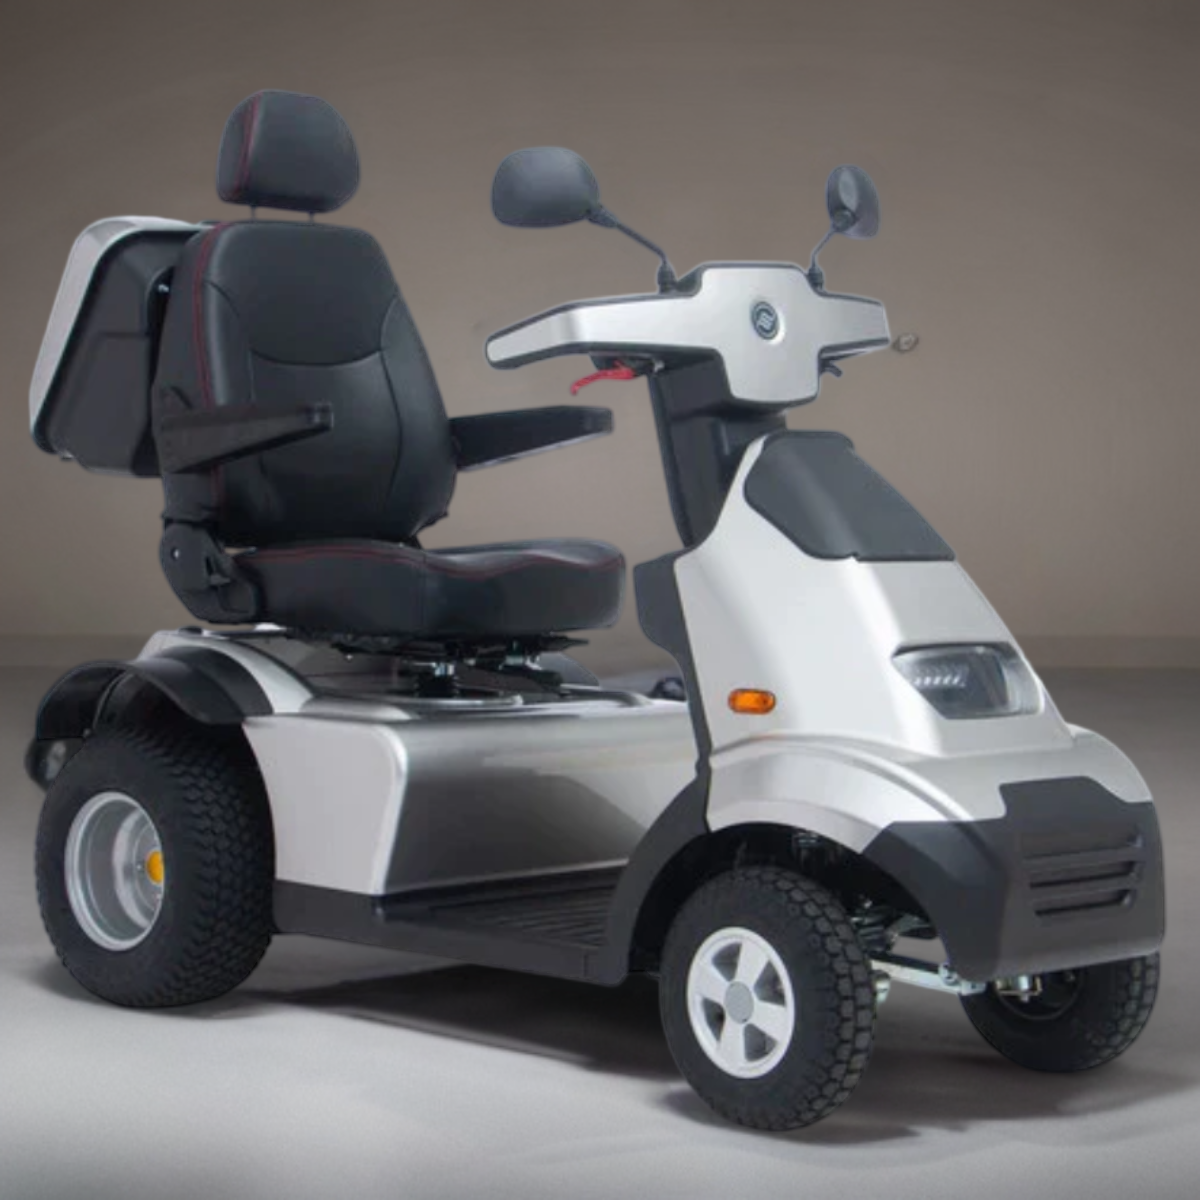 Afikim S4 Heavy Duty On And Off Road Mobility Scooter